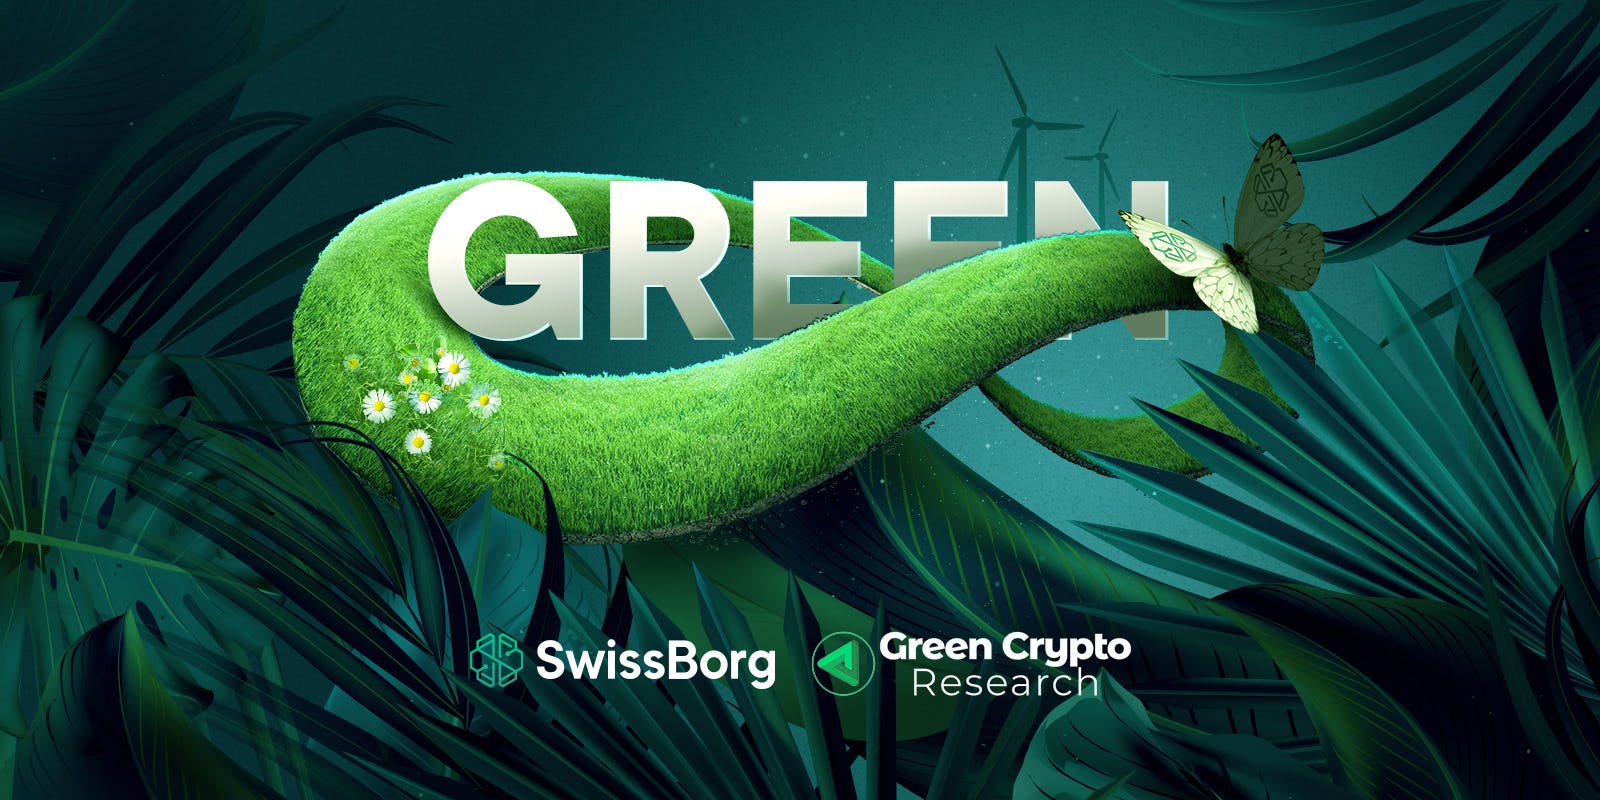 SwissBorg partners with Green Crypto Research